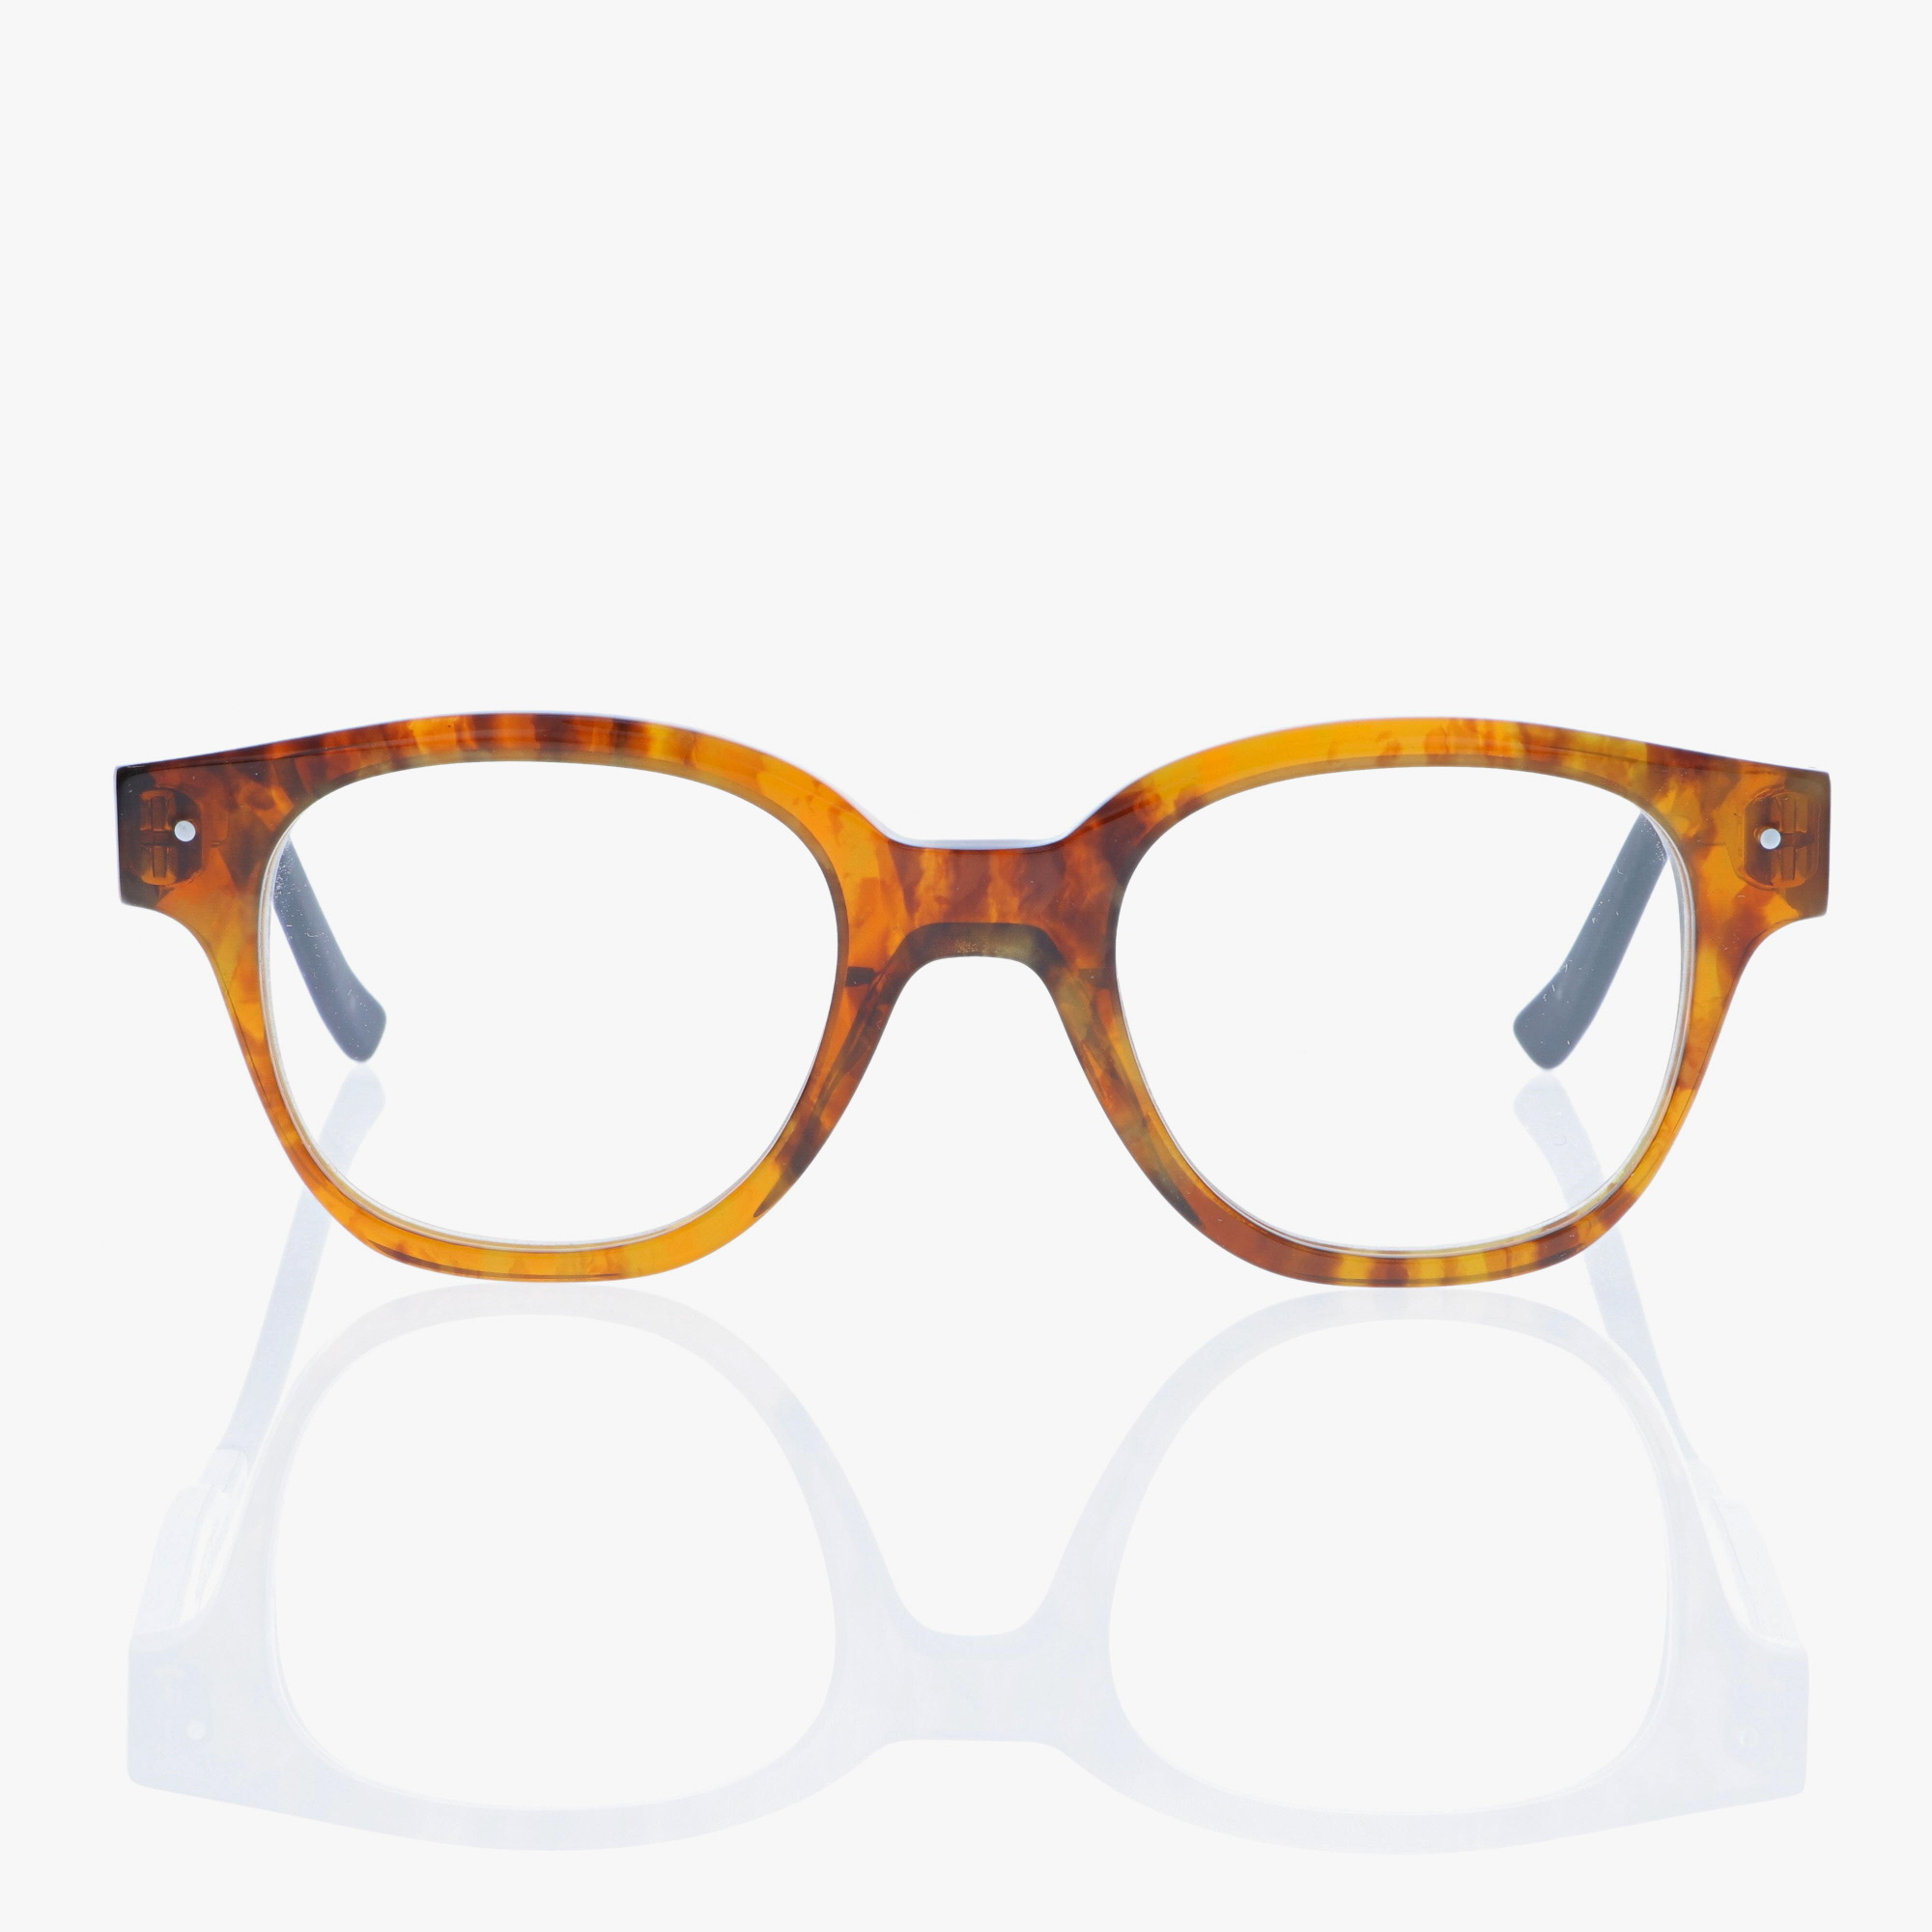 VERY FRENCH GANGSTERS / HYPE 1 / LIGHT TORTOISE SHELL